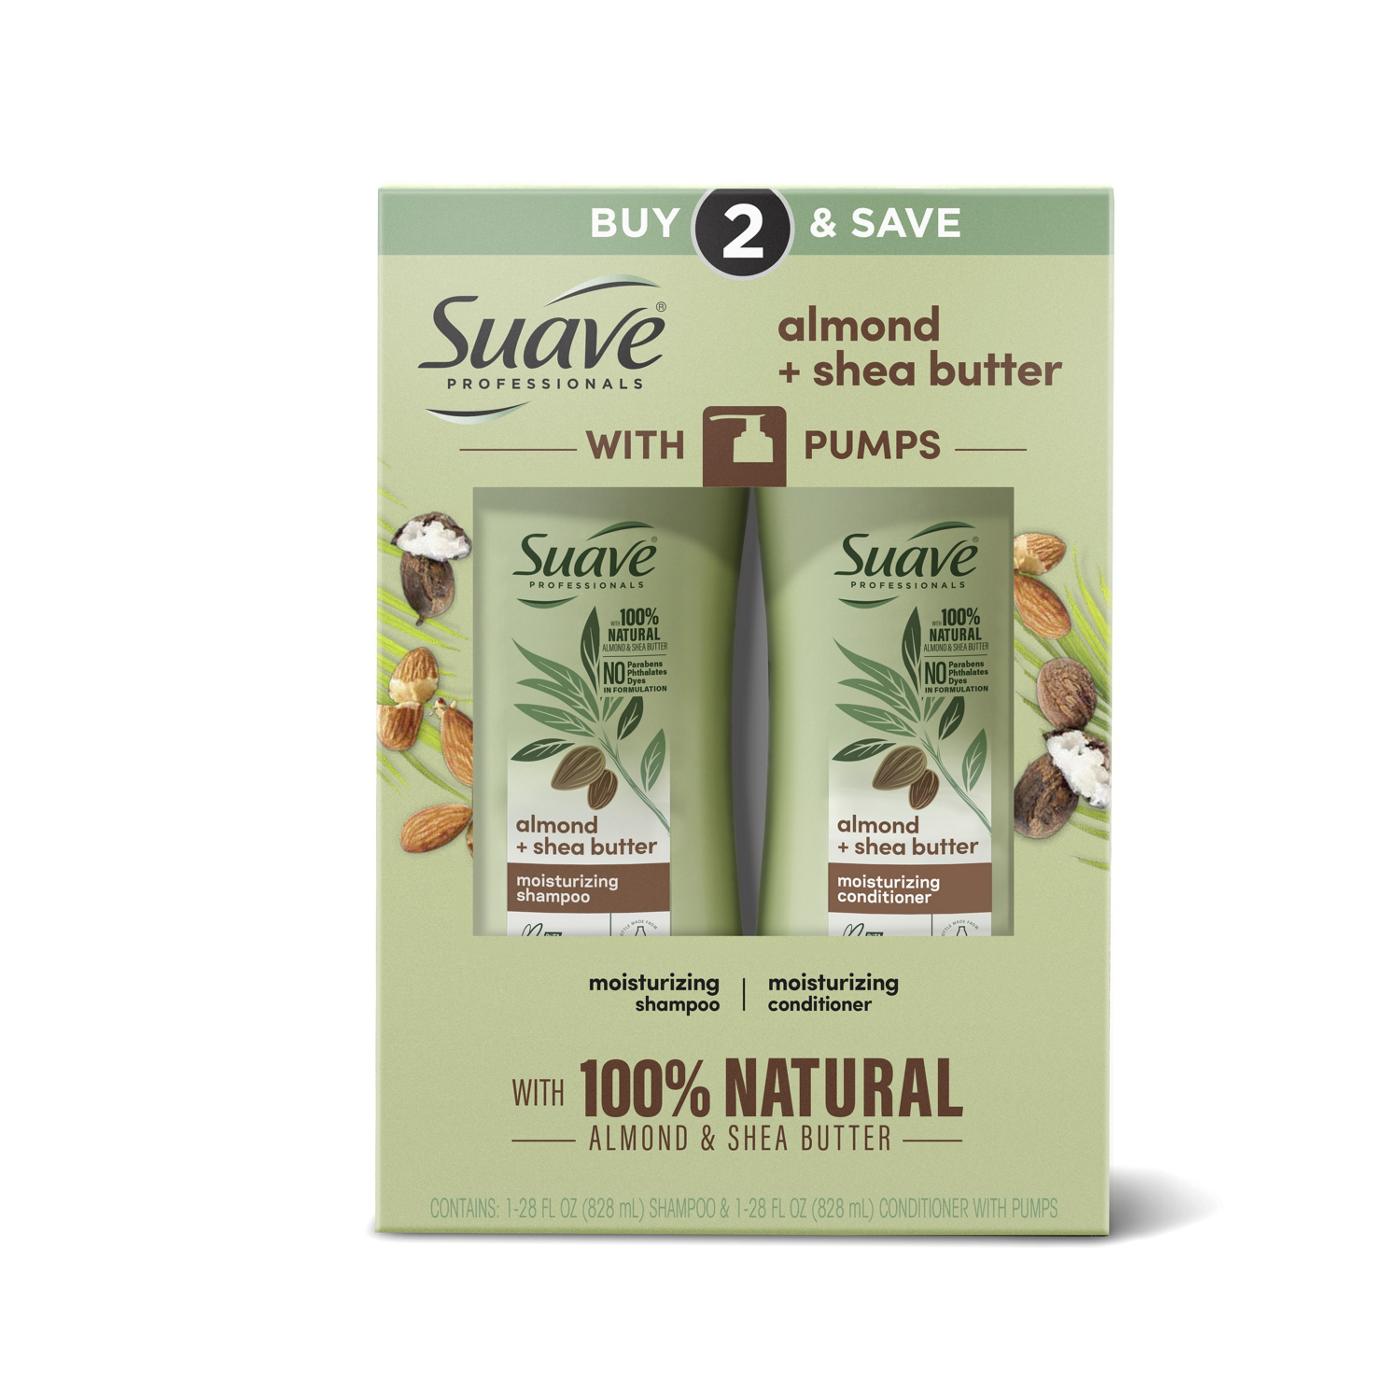 Suave Professionals Almond + Shea Butter Shampoo & Conditioner Combo Pack; image 1 of 7